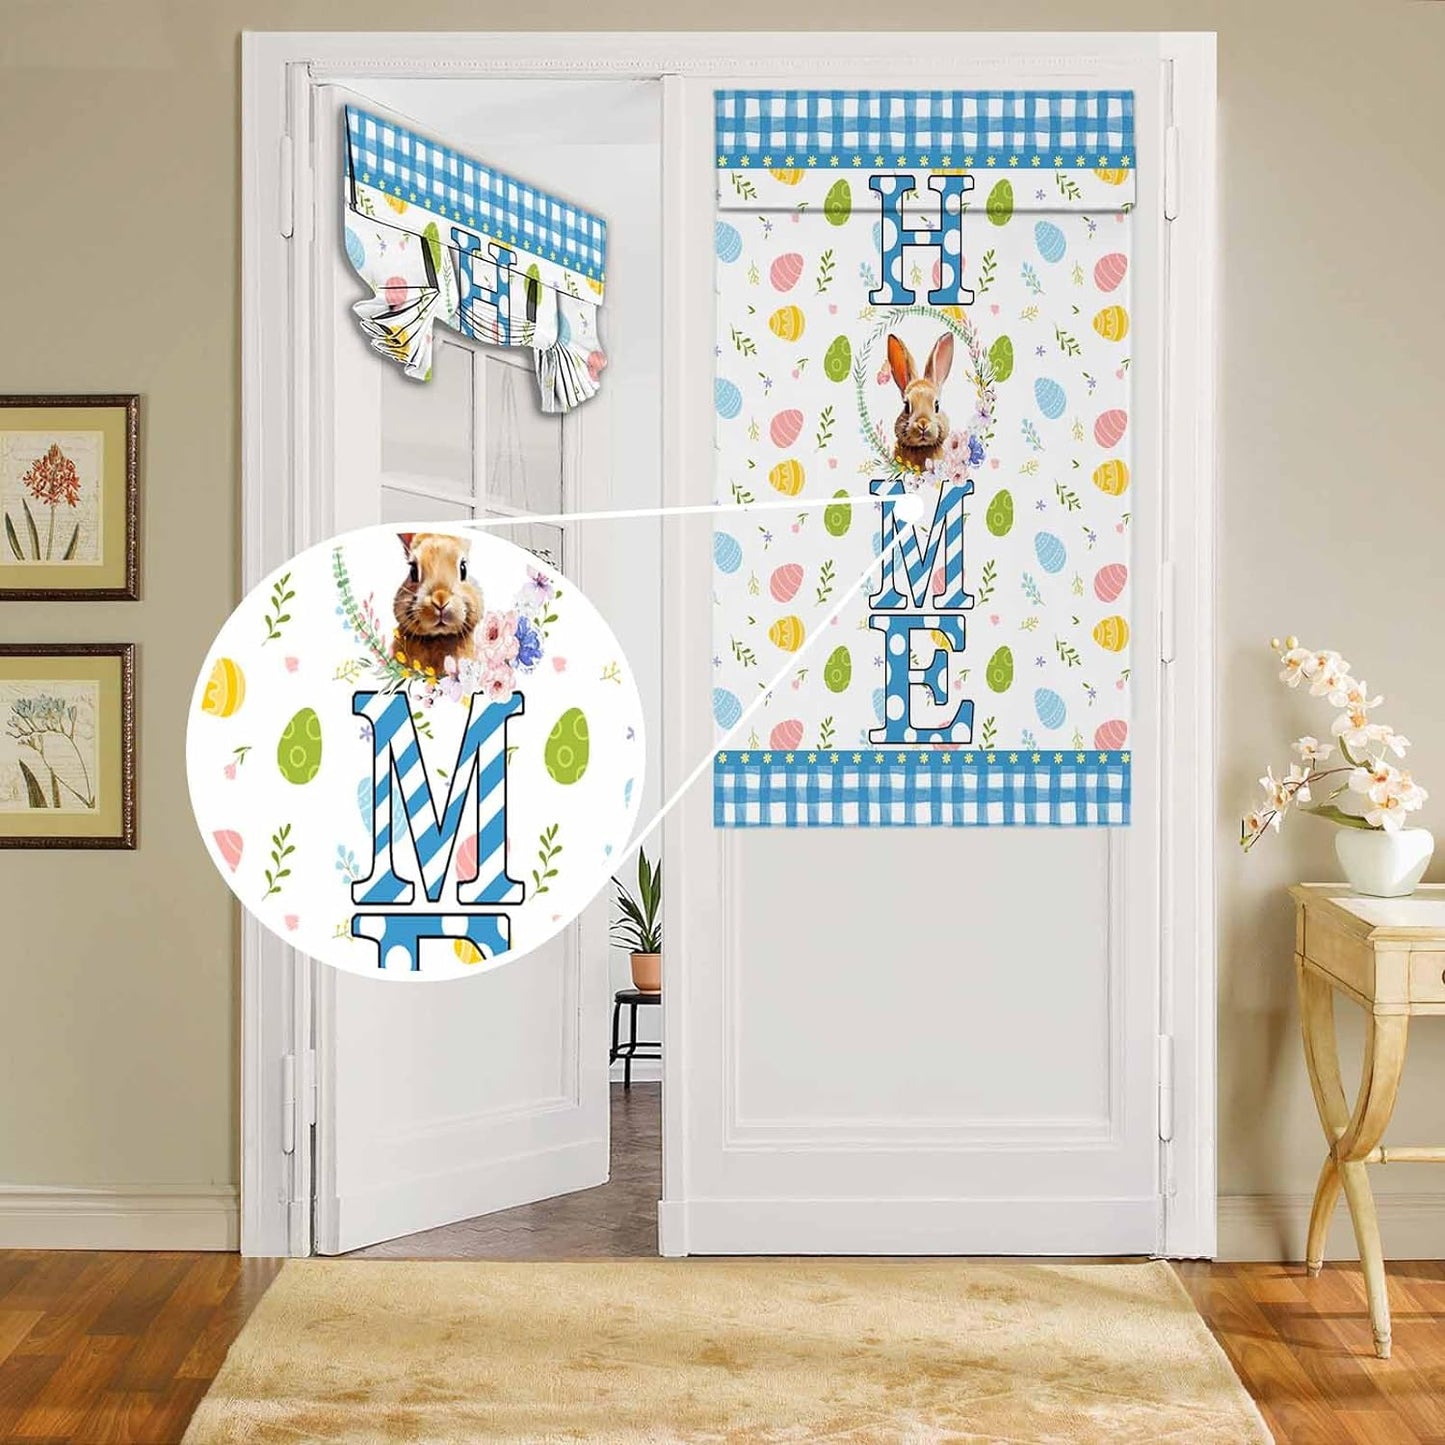 BEMIGO Door Curtains for Door Windows, Vintage Wooden Door Window Curtains for French Glass Door, Privacy Thermal Insulated Tie up Door Shades, Farmhouse Colorful Small Window Curtains 26 X 42 Inch  BEMIGO Blue Easter 42.00" X 26.00" 